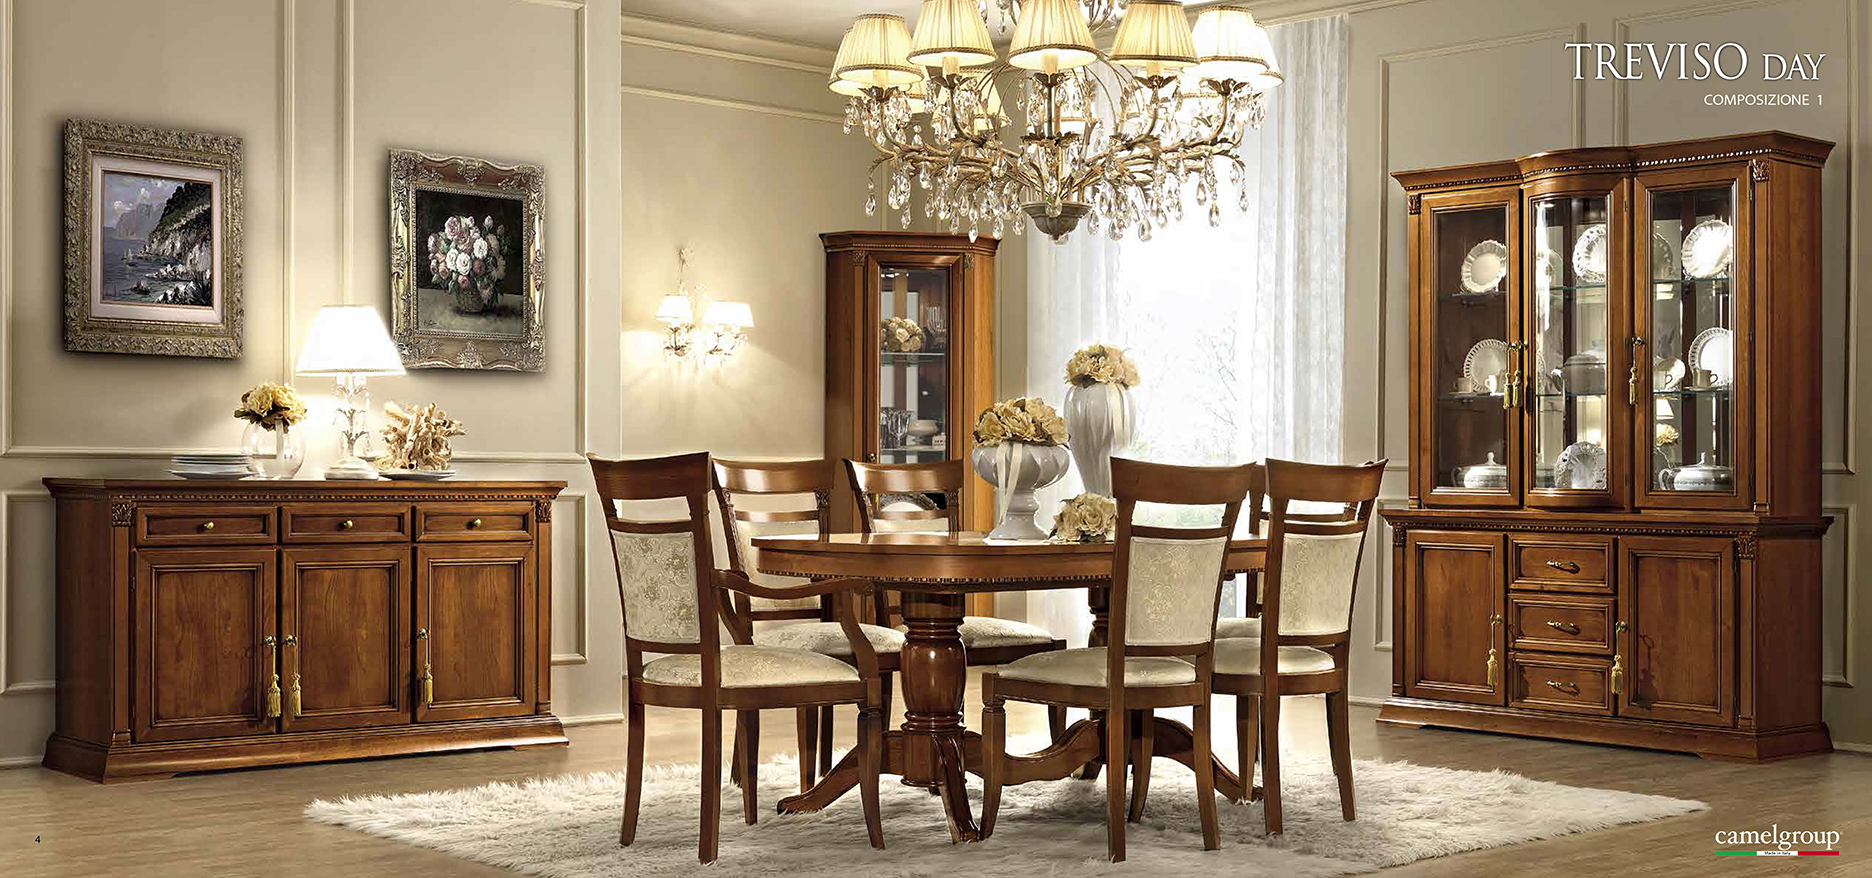 Dining Room Furniture Marble-Look Tables Treviso Cherry Day